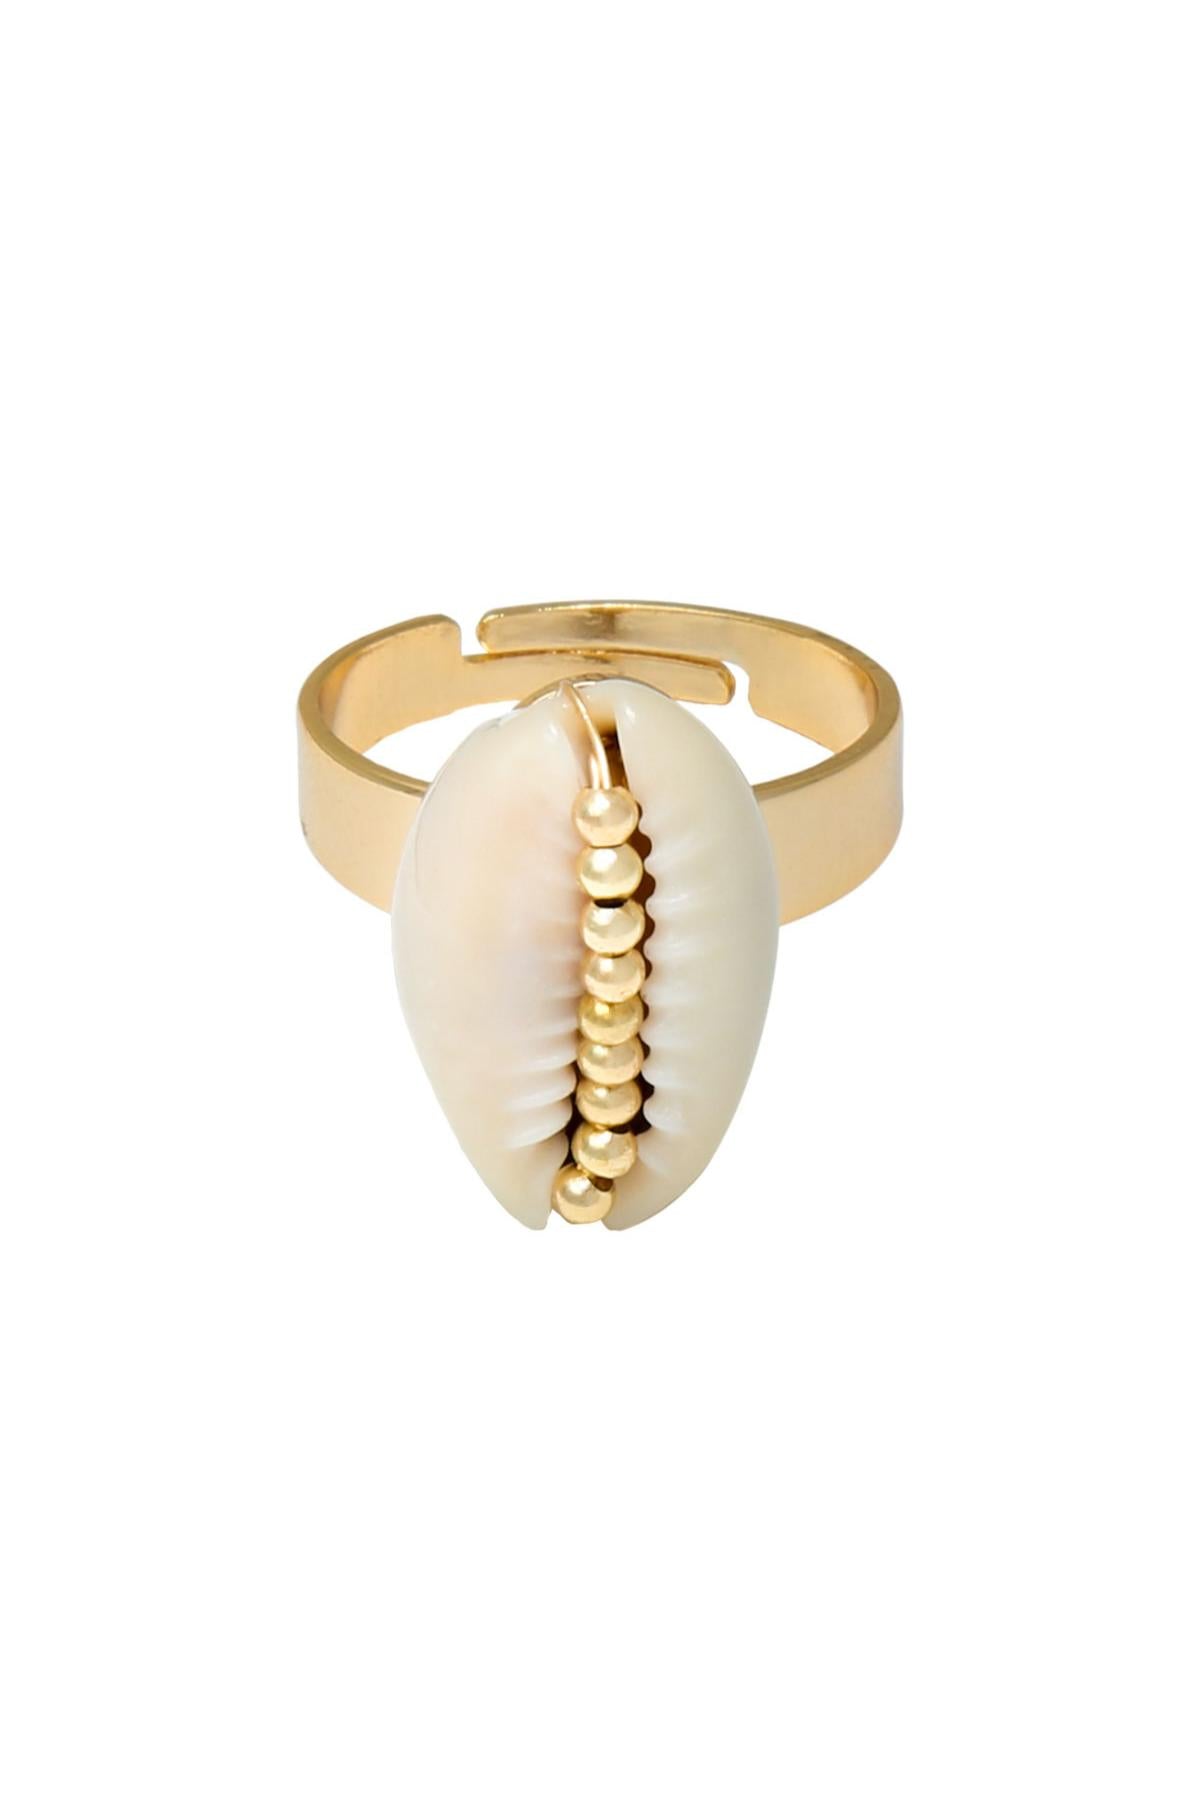 Shell Gold Copper Ring - SAOROPHO